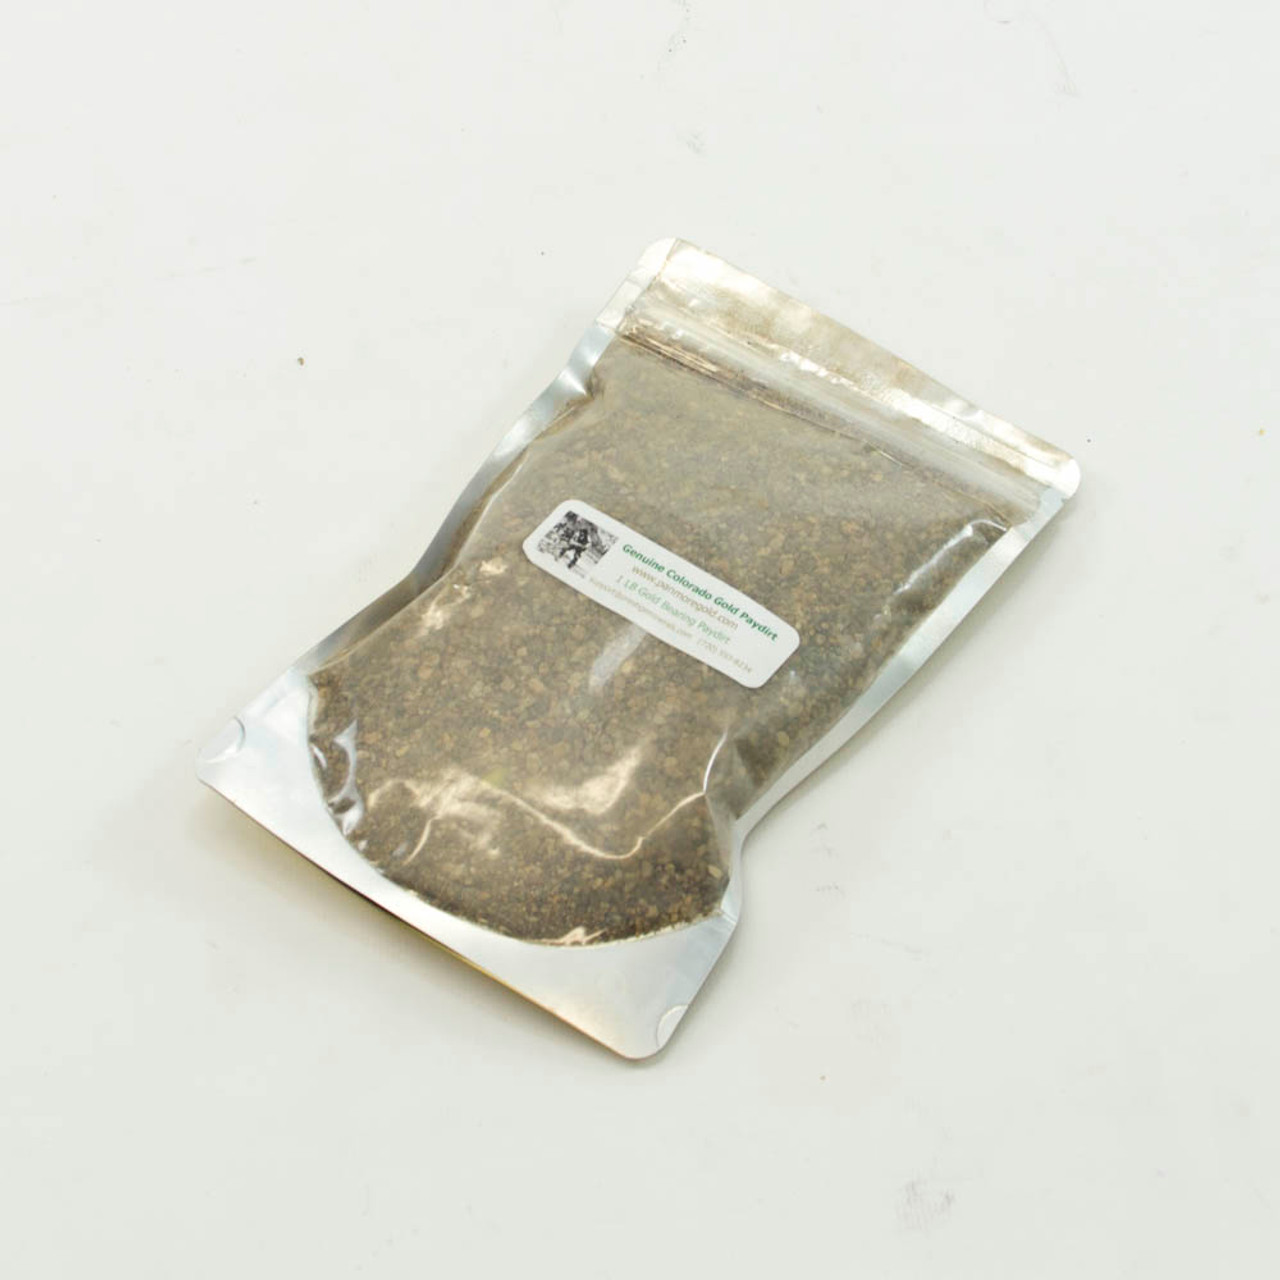 Gold Pay Dirt, 1 pound bag for Gold Panning